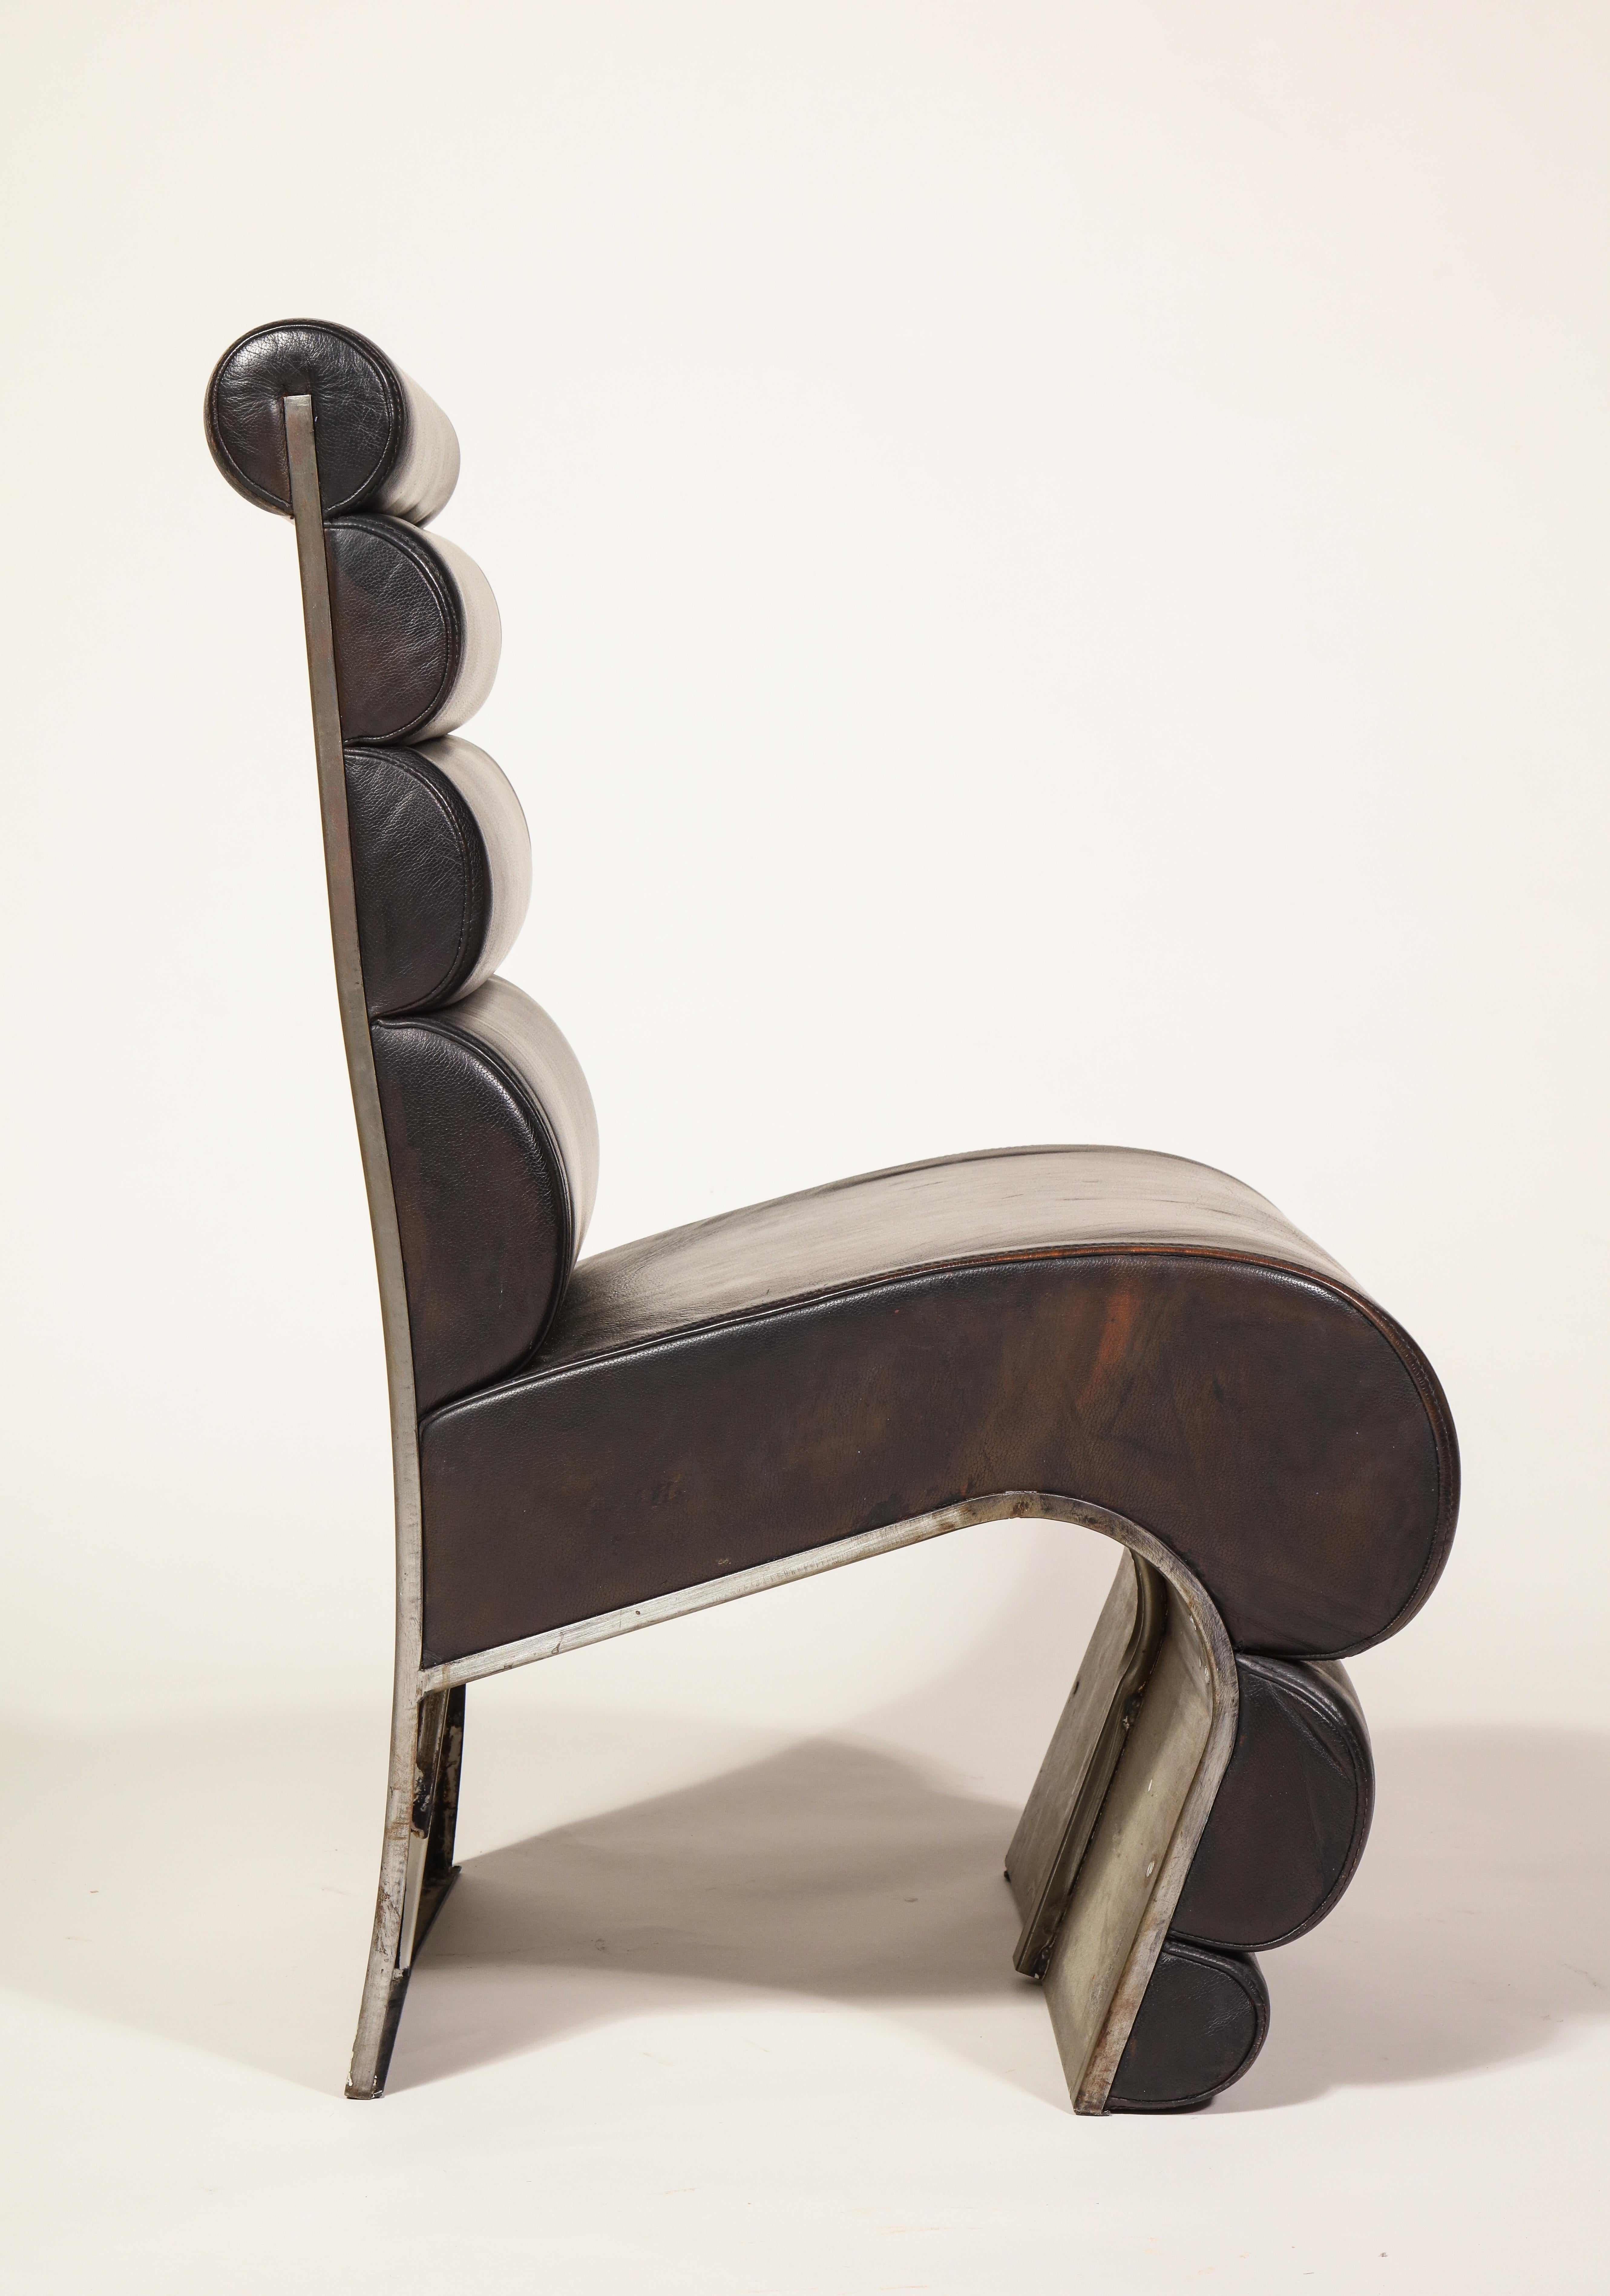 Post-Modern Postmodern Sculptural Steel Brown Leather French Pair of Chairs, 1980s, France For Sale